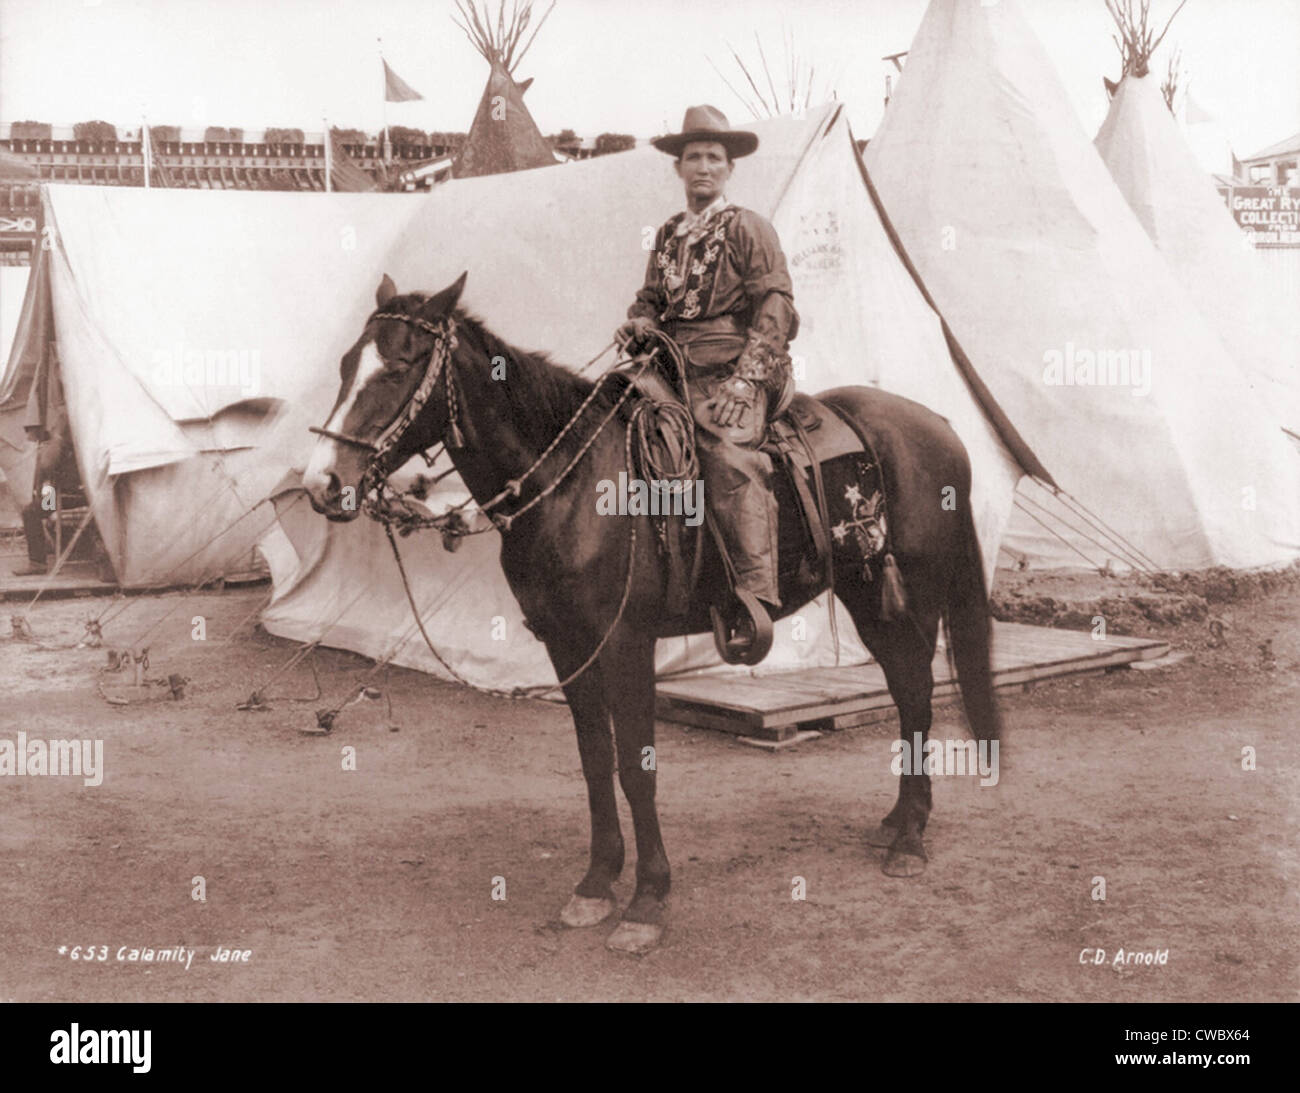 Calamity Jane (1852-1903), posing on horseback. She gained fame in the 1870s and later toured in Wild West shows. Ca. 1885. Stock Photo